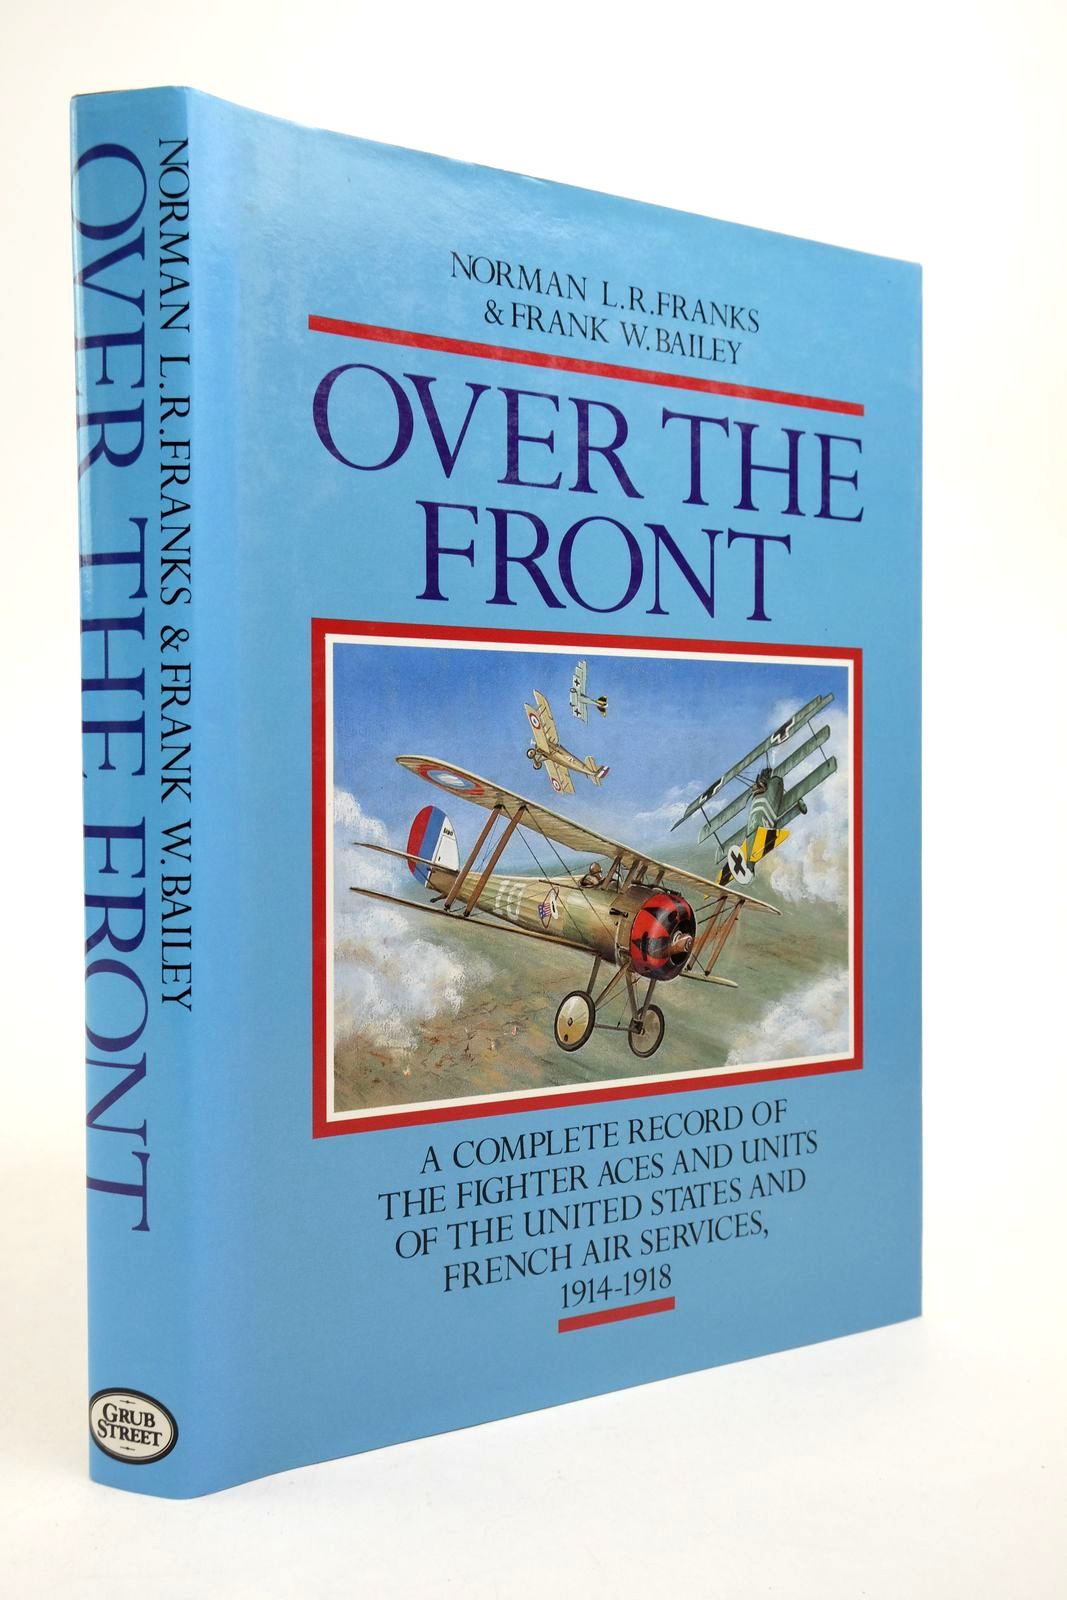 Photo of OVER THE FRONT written by Franks, Norman L.R. Bailey, Frank W. published by Grub Street (STOCK CODE: 2139805)  for sale by Stella & Rose's Books